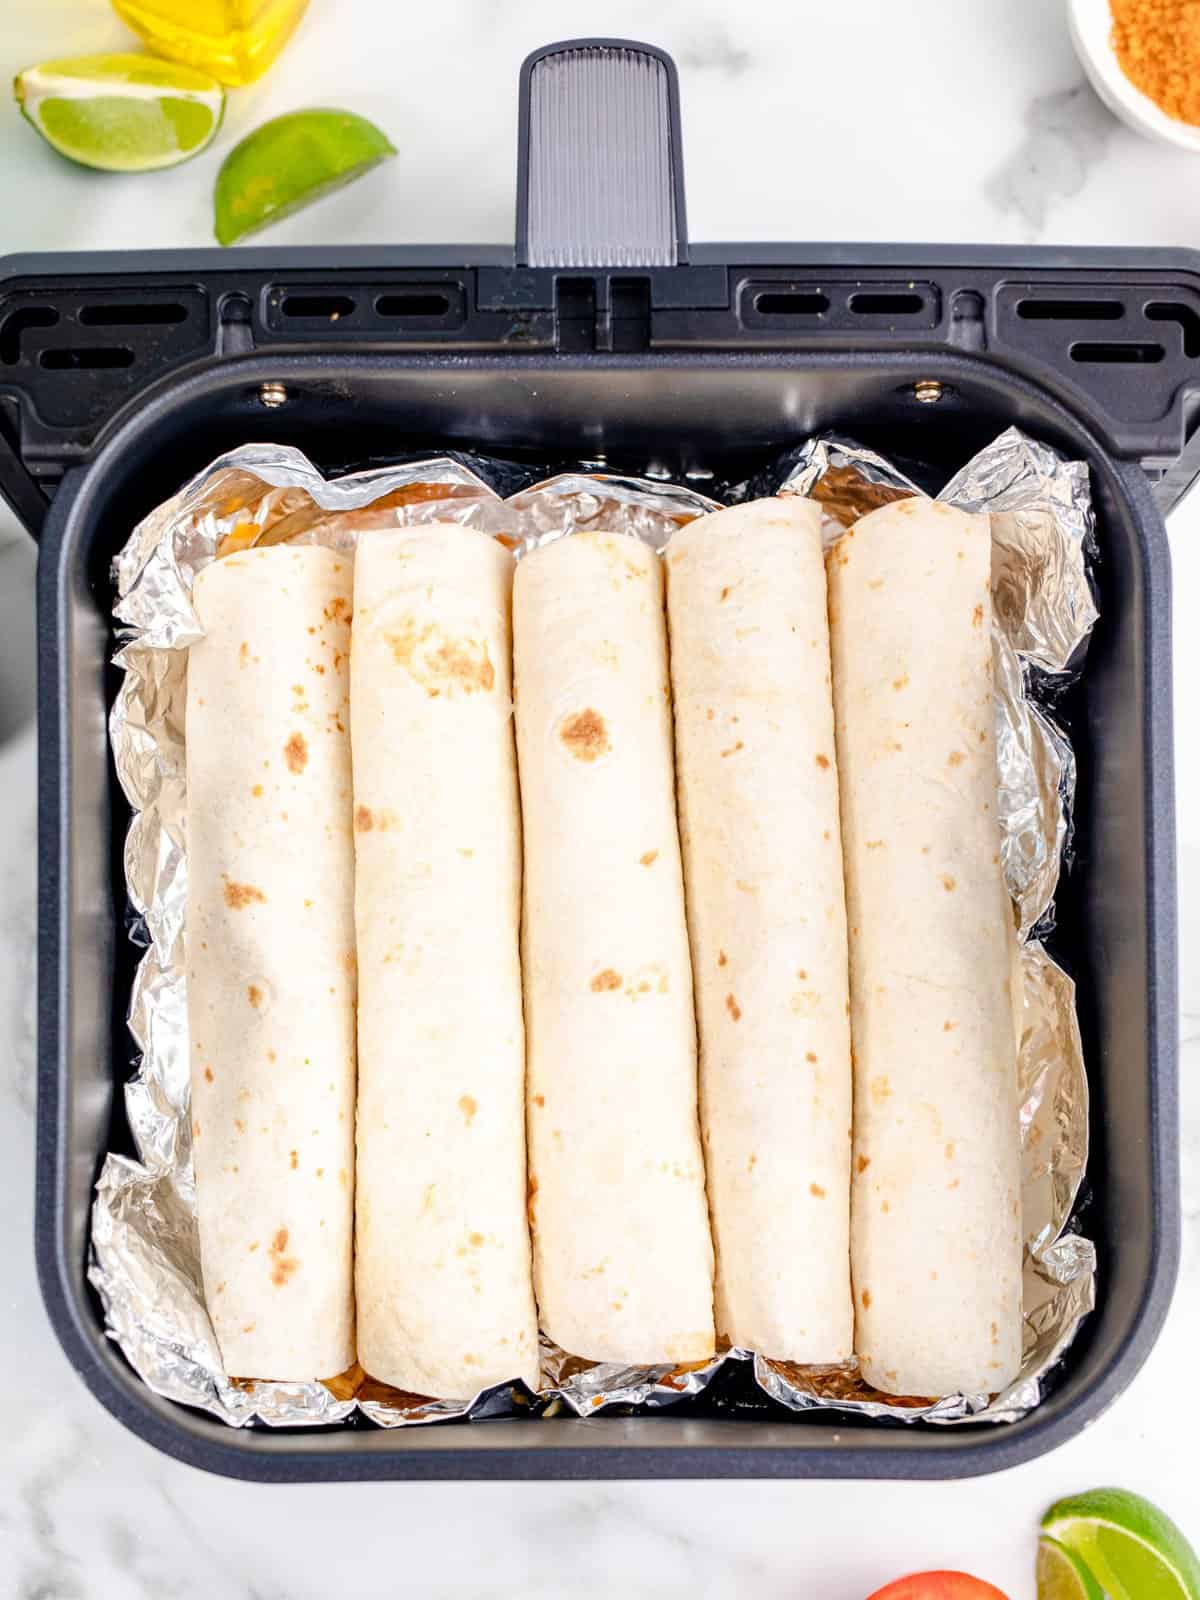 rolled up tortillas lined up and placed on the aluminum foil in the air fryer basket. 